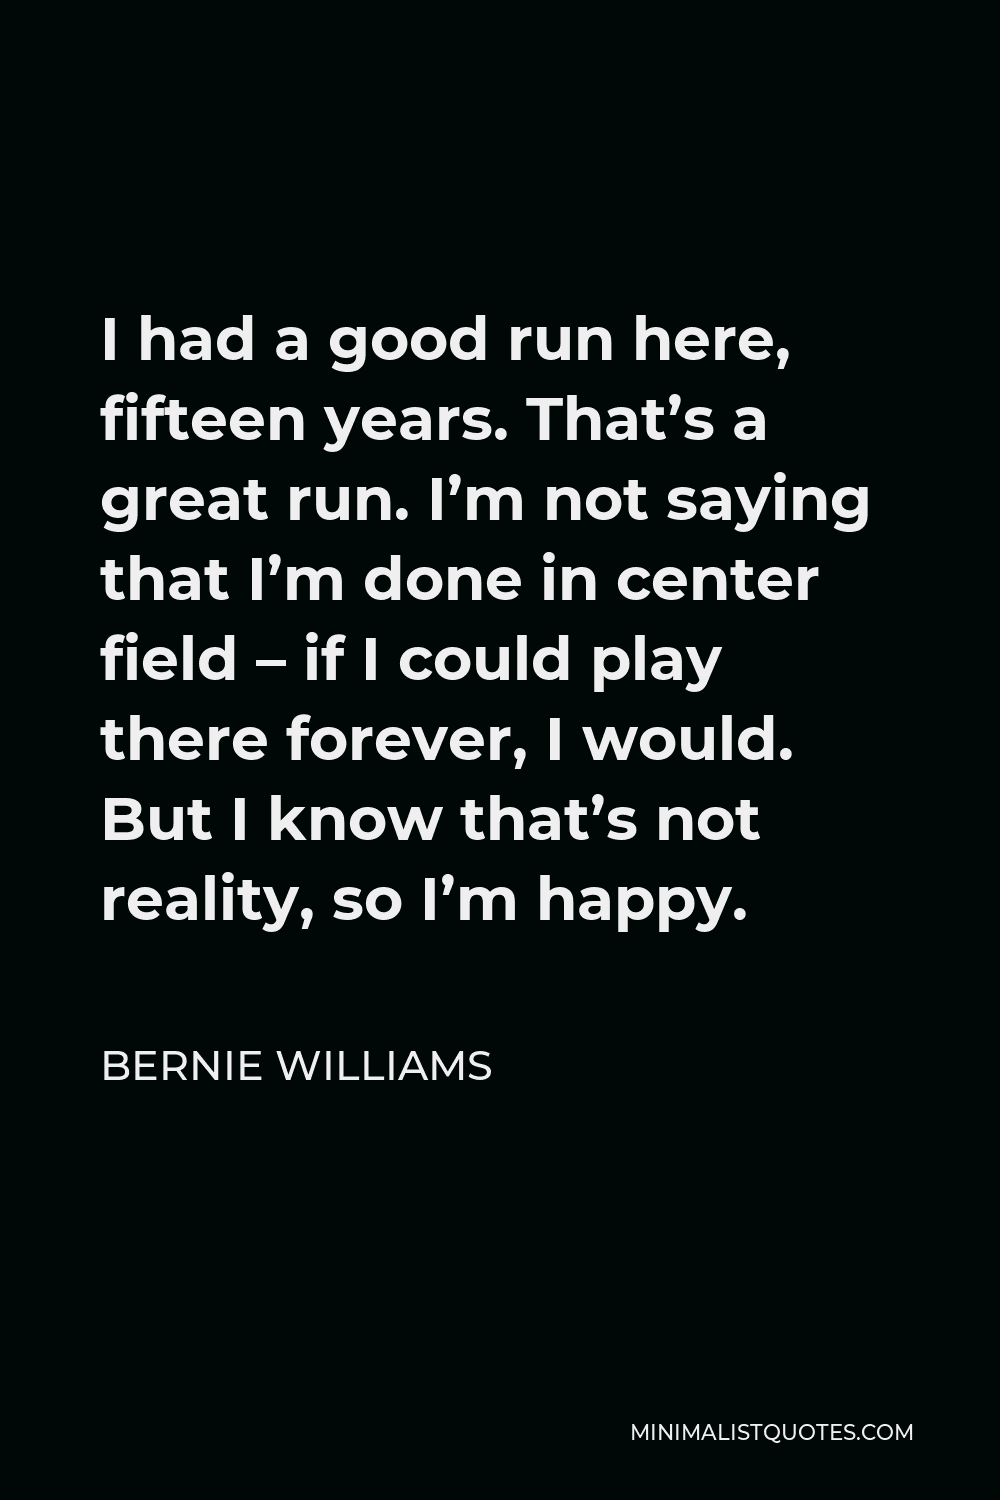 Bernie Williams Quote - I had a good run here, fifteen years. That’s a great run. I’m not saying that I’m done in center field – if I could play there forever, I would. But I know that’s not reality, so I’m happy.